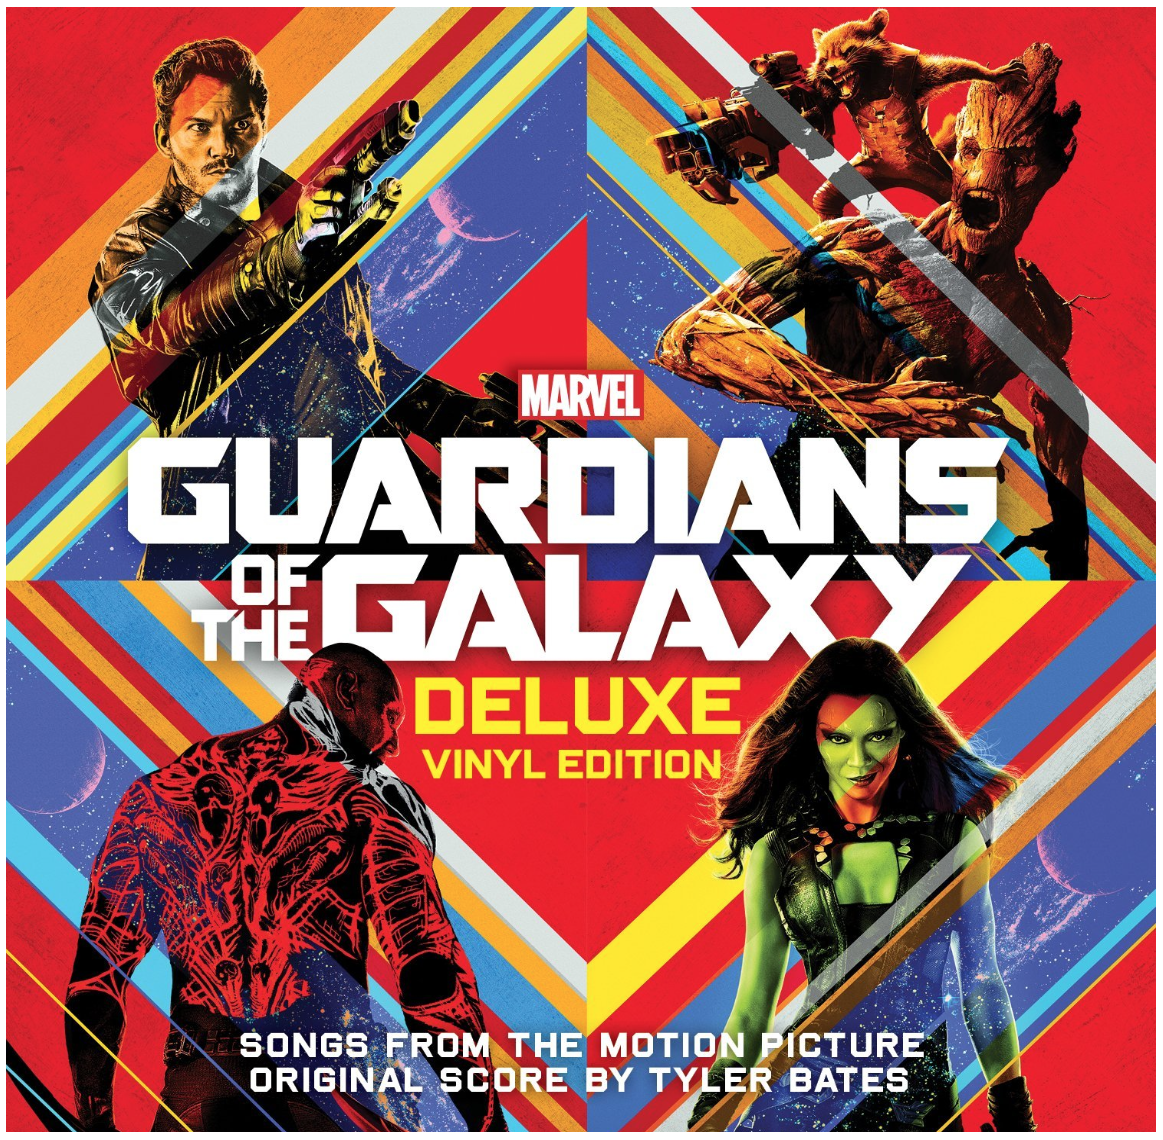 Guardians Of The Galaxy 1 - OST